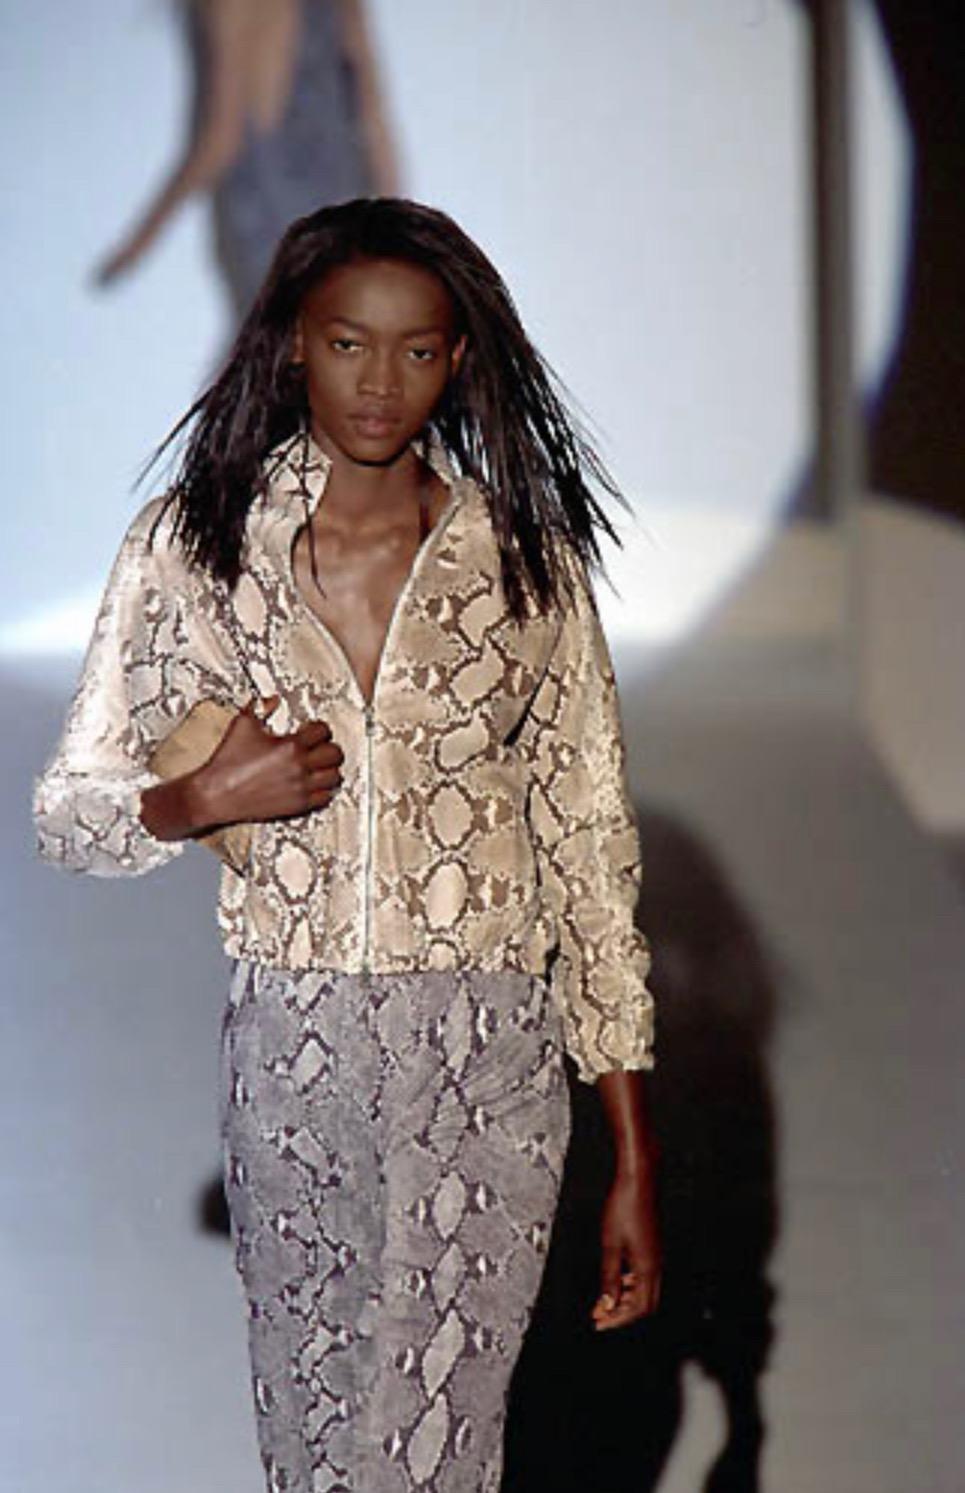 Presenting a fabulous grey snake print Gucci pant set, designed by Tom Ford. From the Spring/Summer 2000 collection, the season's runway was covered in the identical snakeskin print as this set with the pants debuting on the season's runway as part